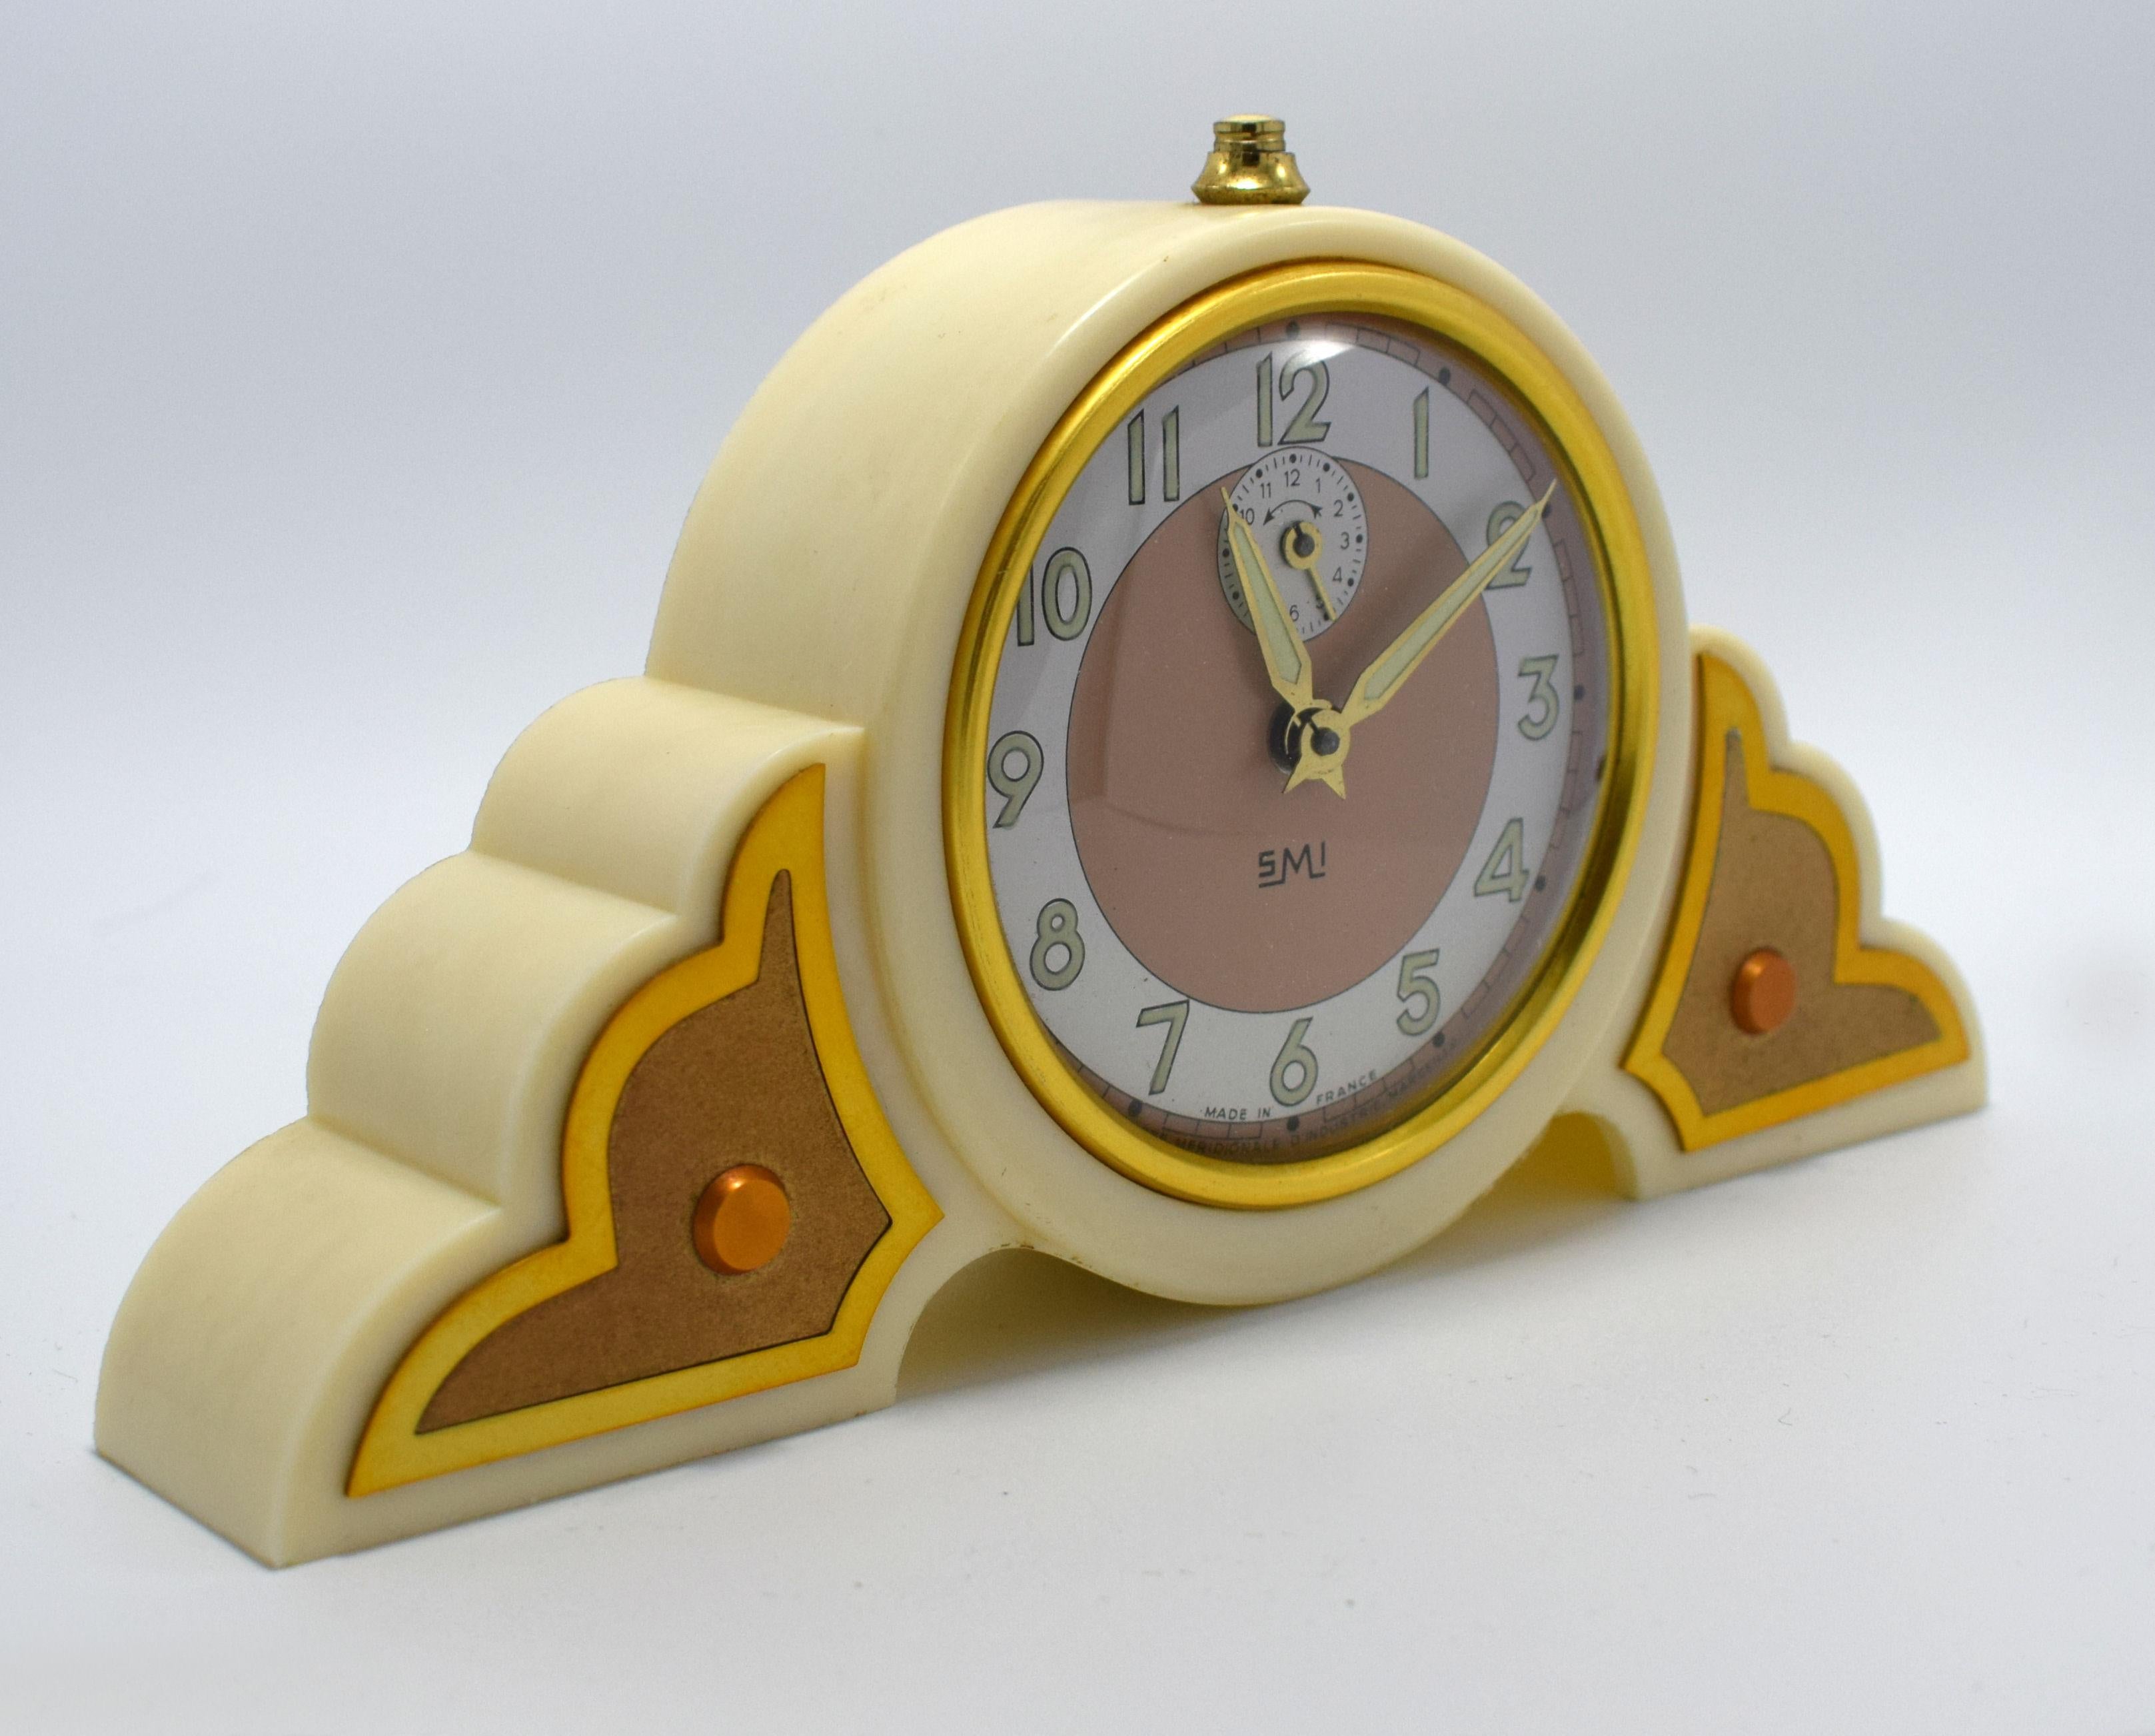 Very attractive 1930s Art Deco Ivory colored bakelite clock. Originating from France and made by SMI this wonderful clock is the epitome of Art Deco with its fabulous cloud shaped case. The clock works well and keeps good time as does the